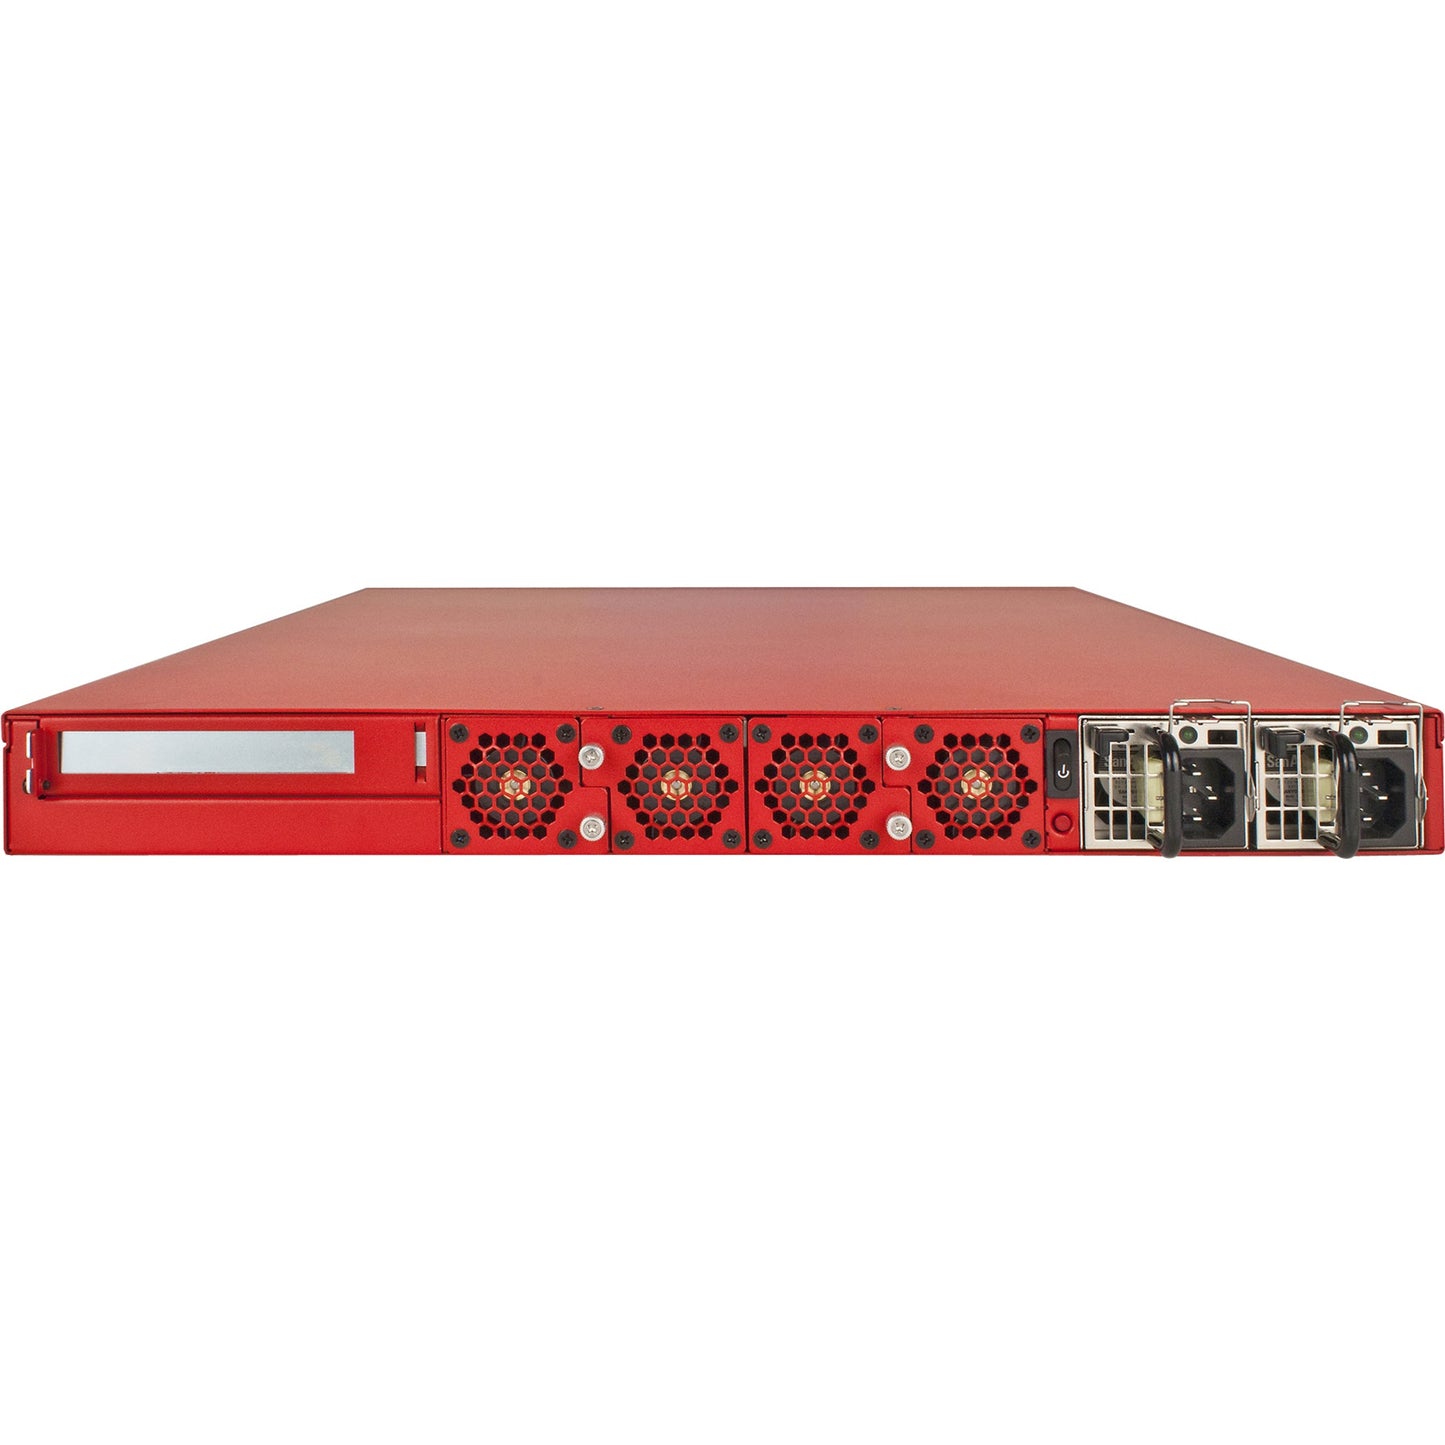 WatchGuard Firebox M5600 with 1-yr Basic Security Suite